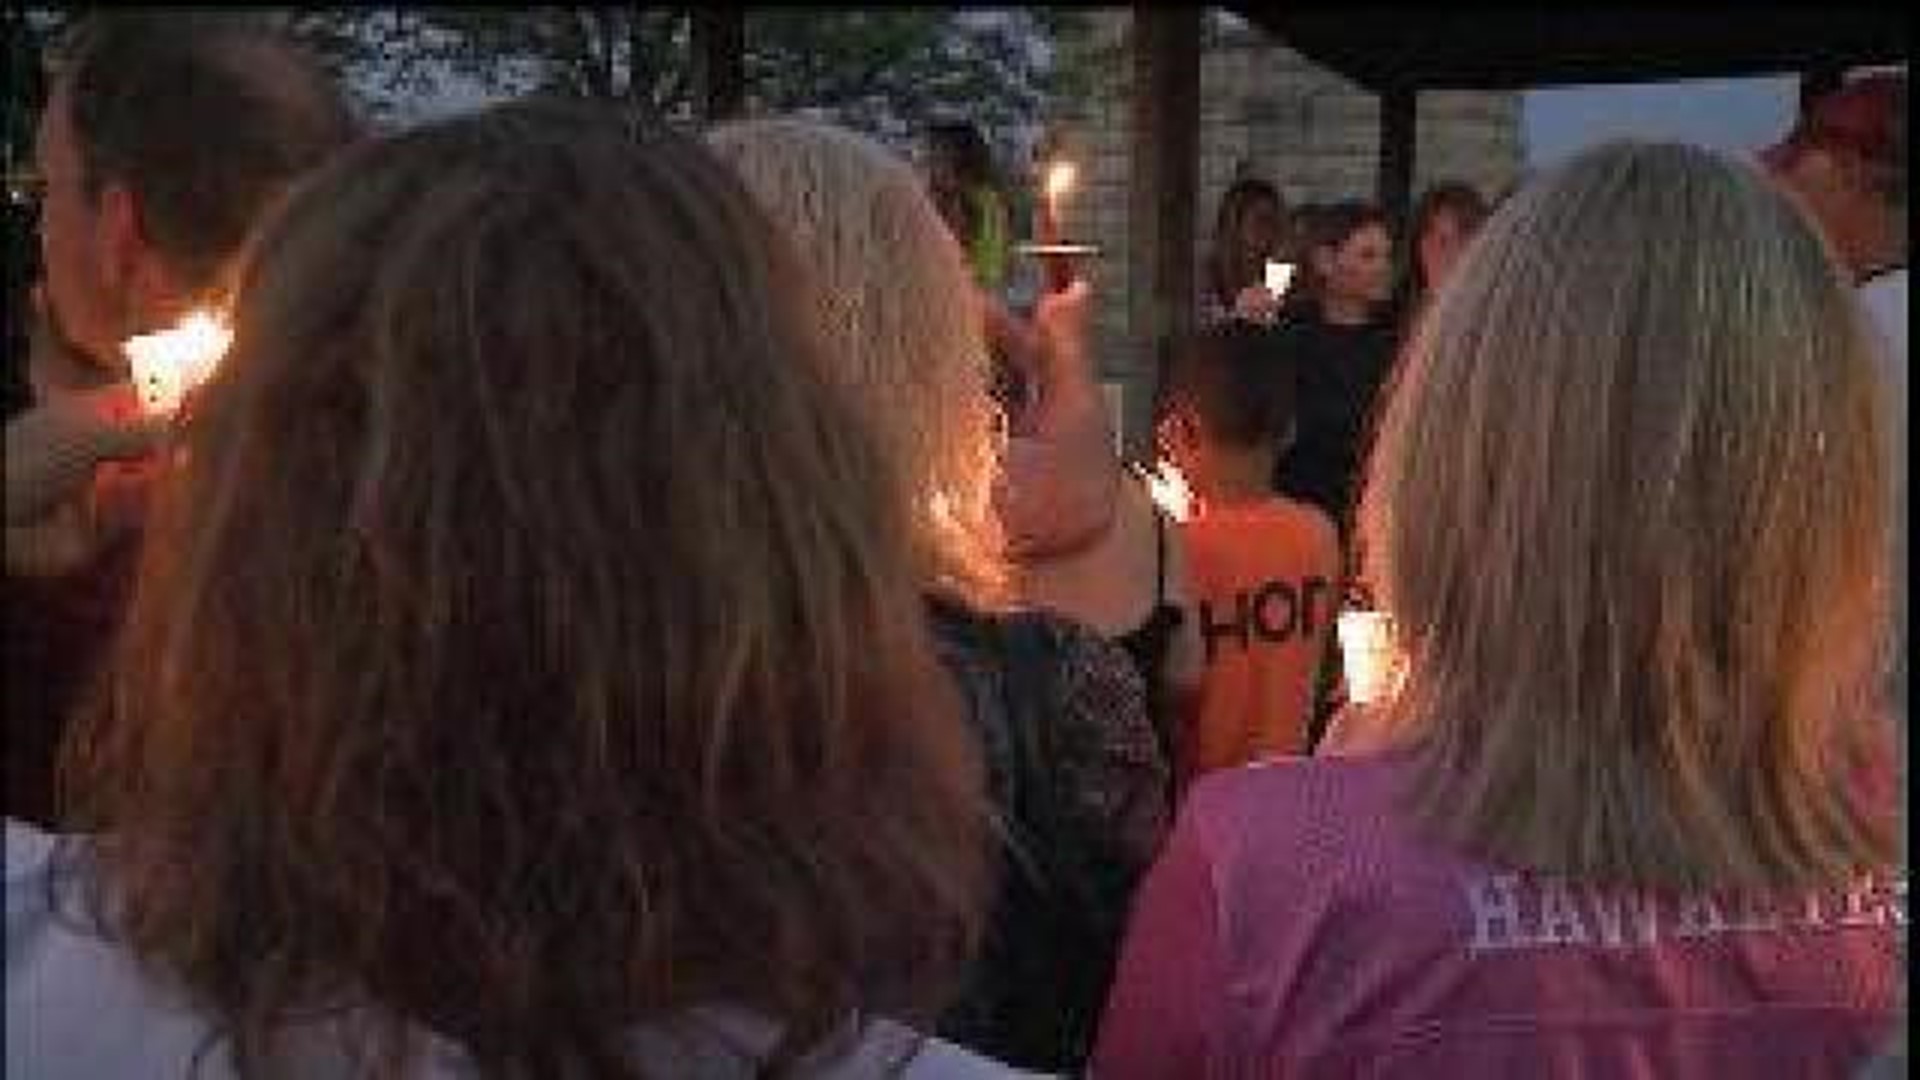 Vigil held for Muscatine man who died from stab wound